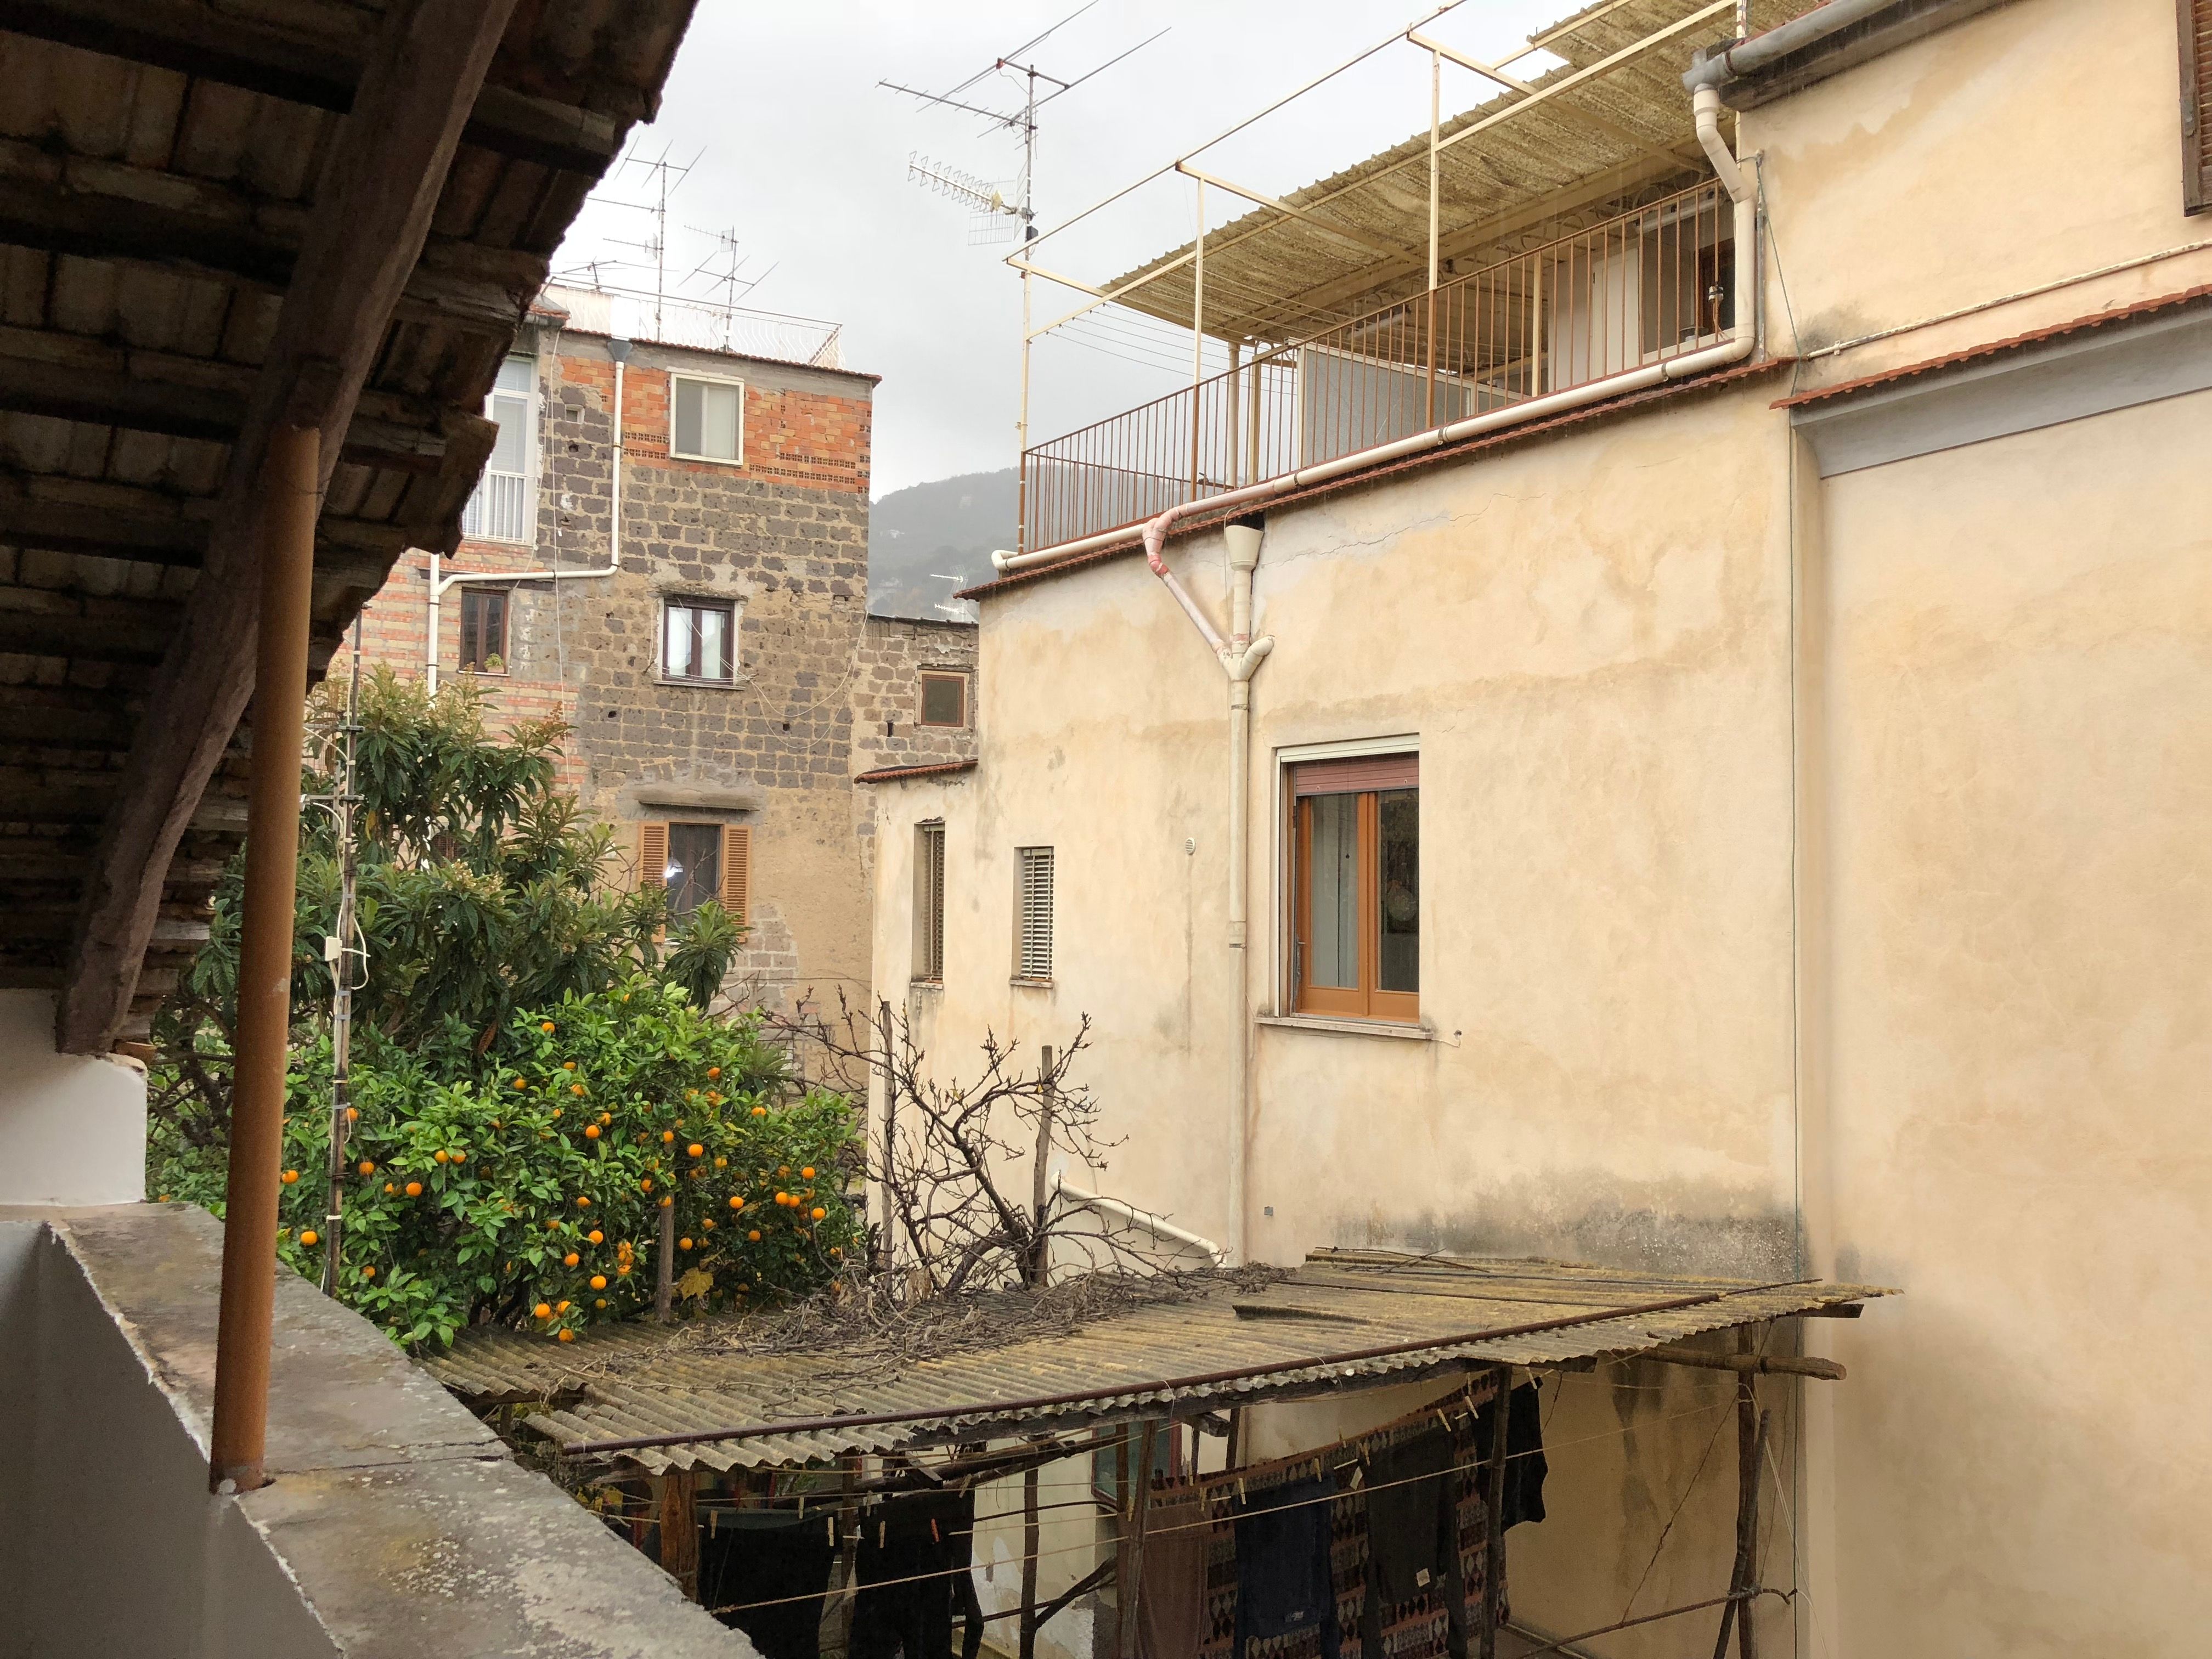 A sunny courtyard. The buildings around it are run down and their roofs are covered in TV antennas. An orange tree grows on one side.